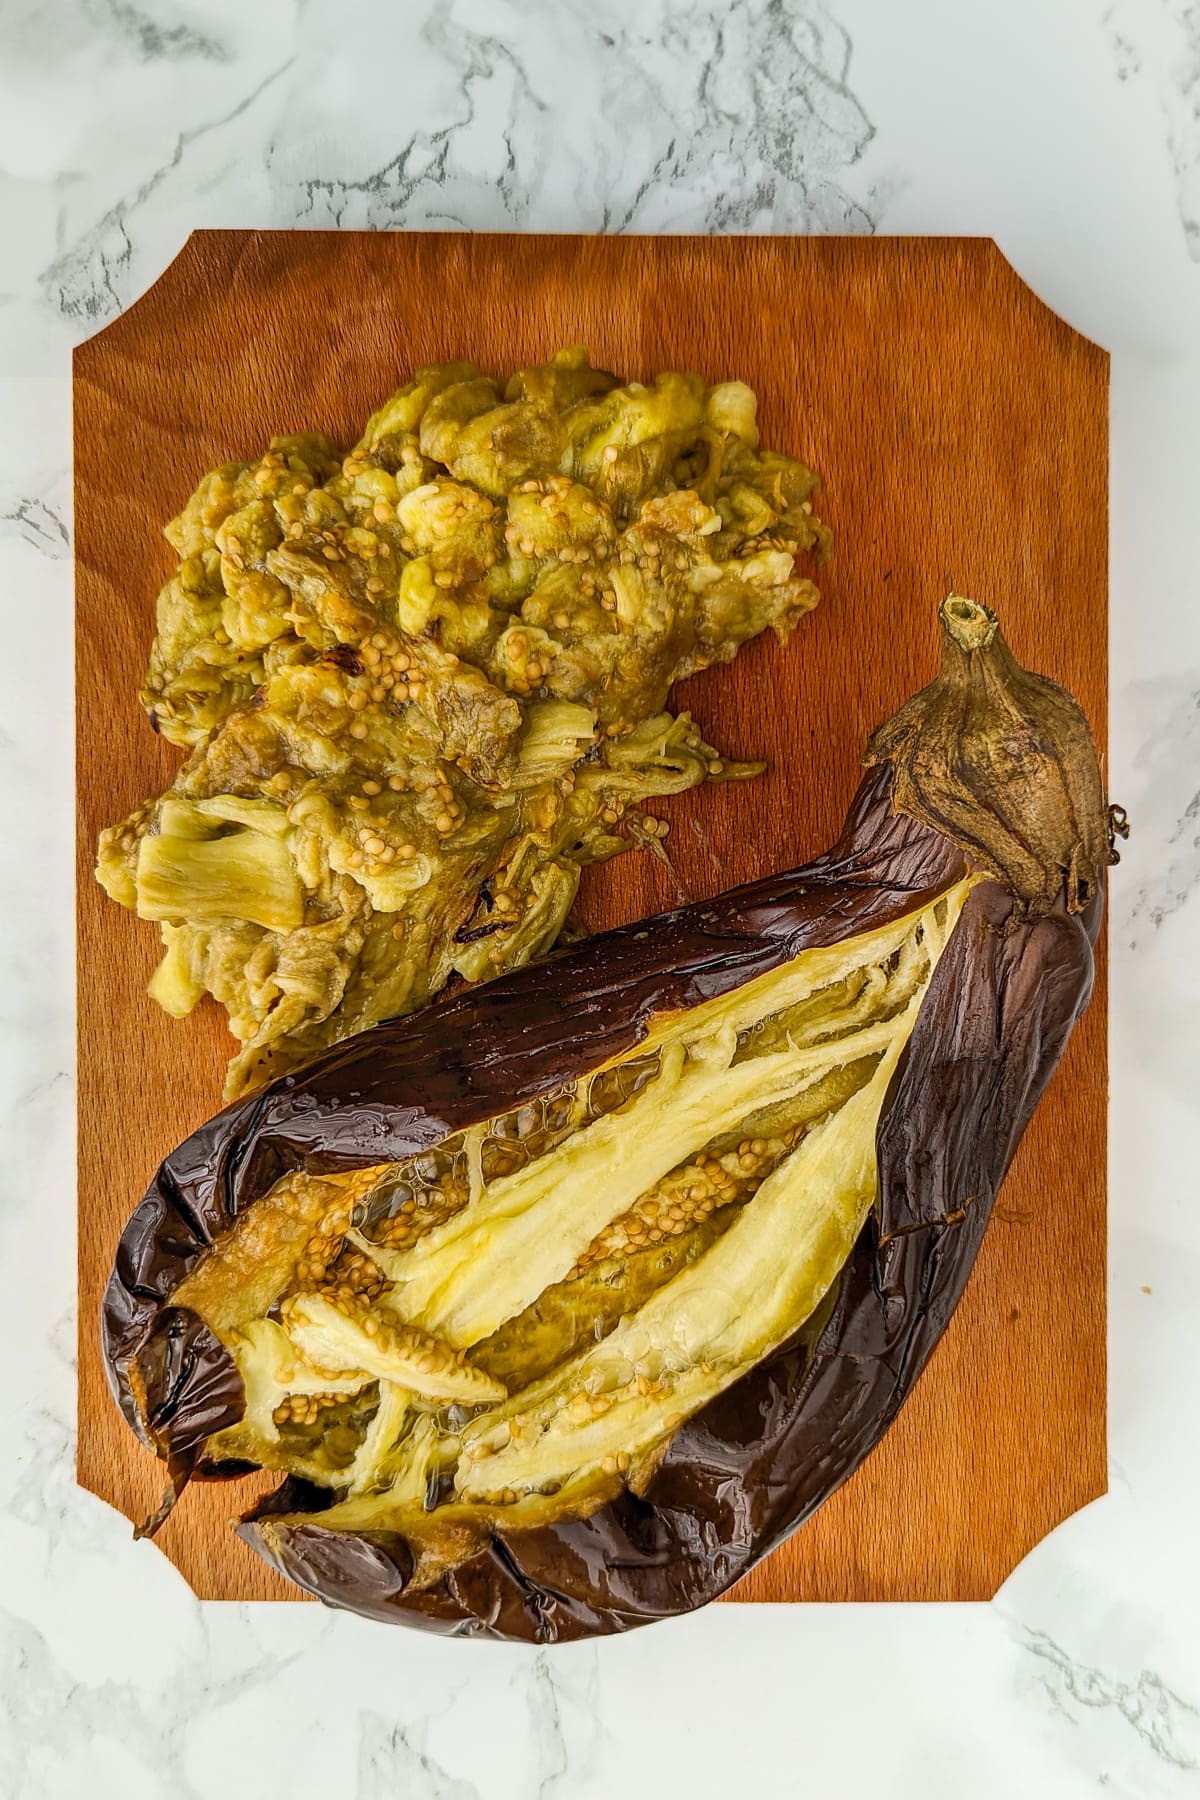 Top view of a baked eggplant on a wooden cutting board.